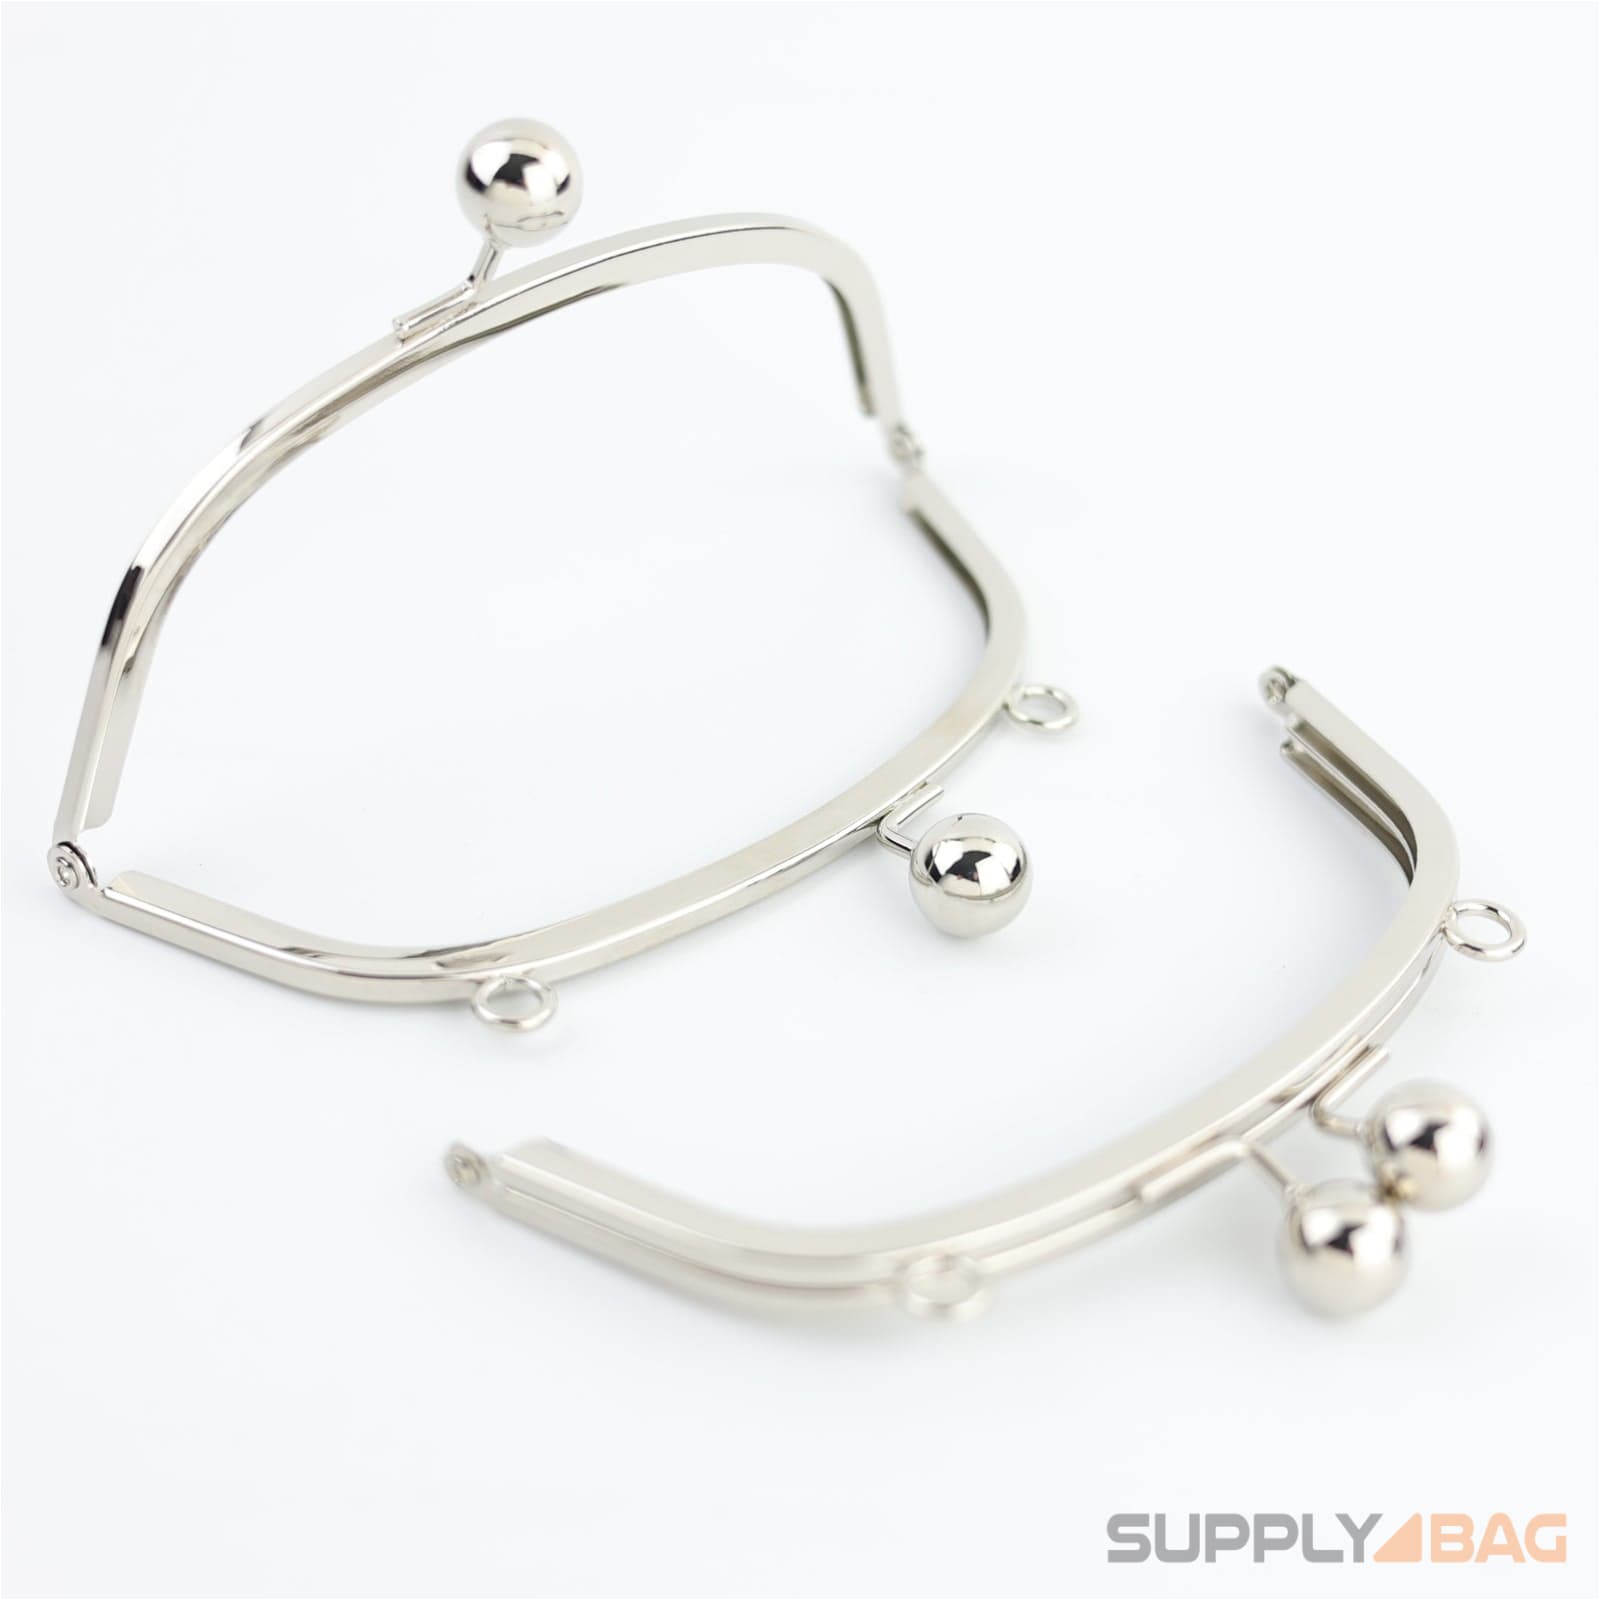 6 x 2 1/4 inch - ball clasp - silver metal purse frame with o rings 